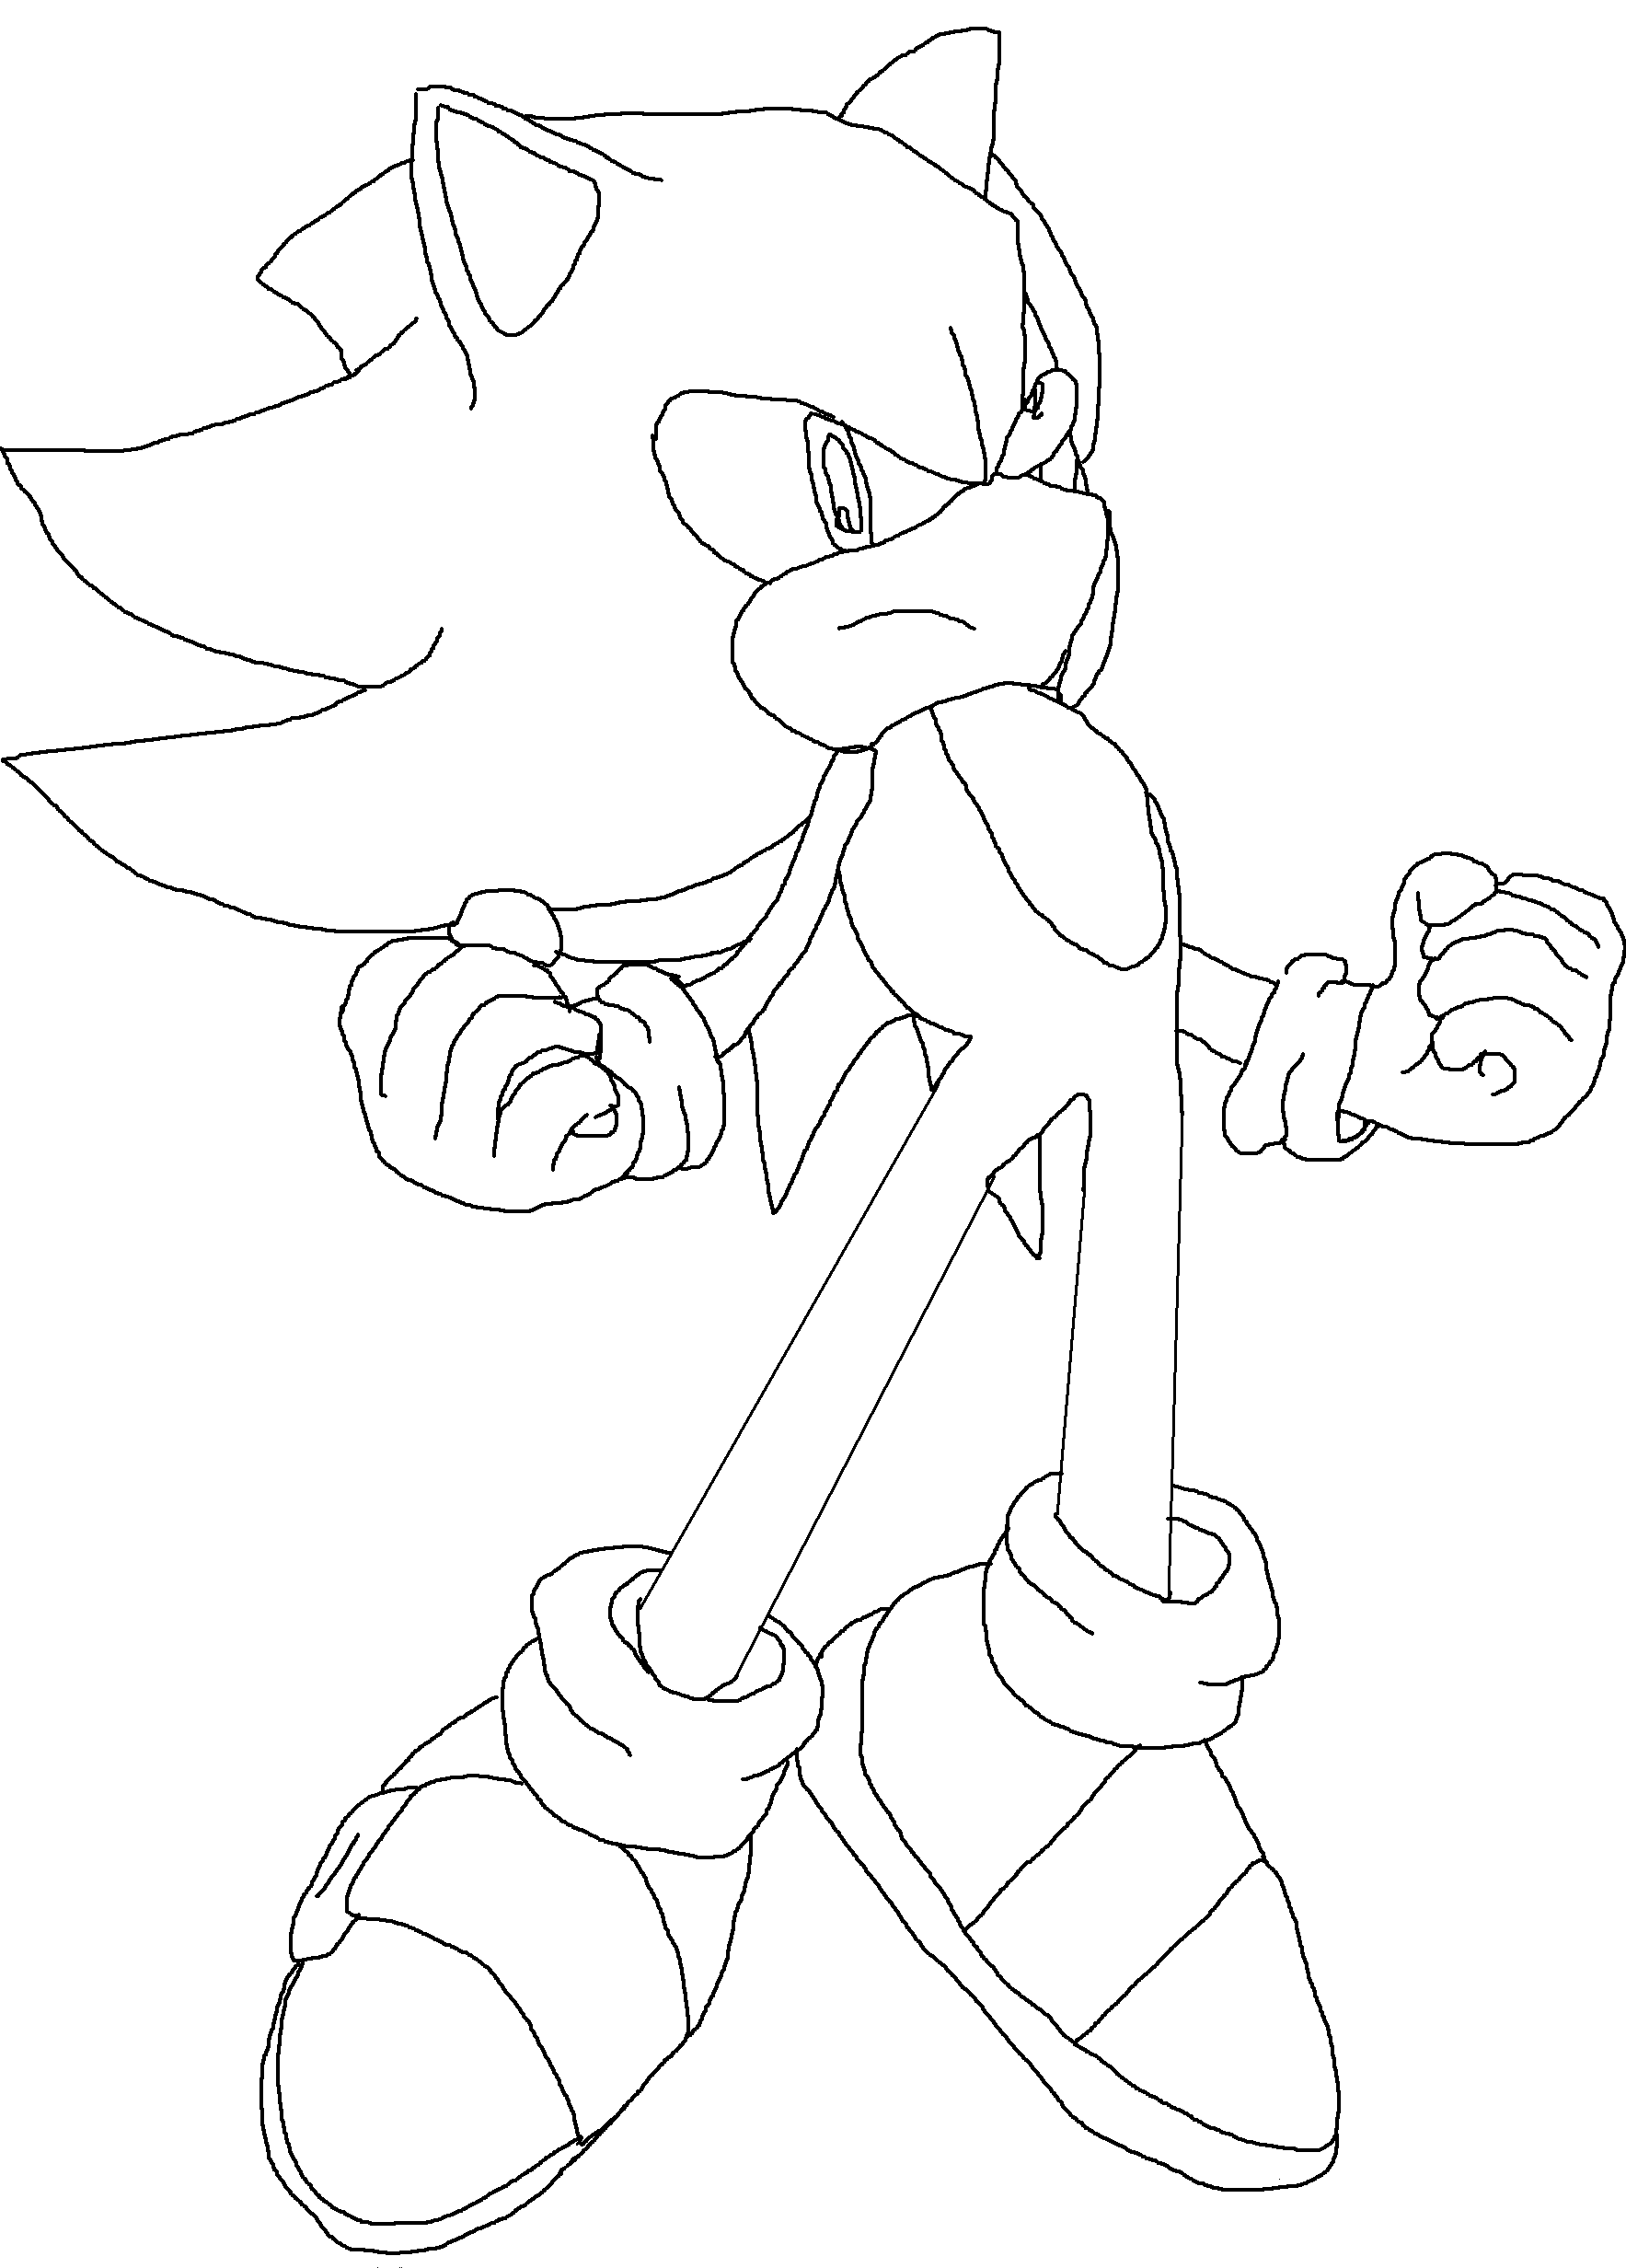 sonic coloring pages printable free printable sonic the hedgehog coloring pages for kids pages printable coloring sonic 